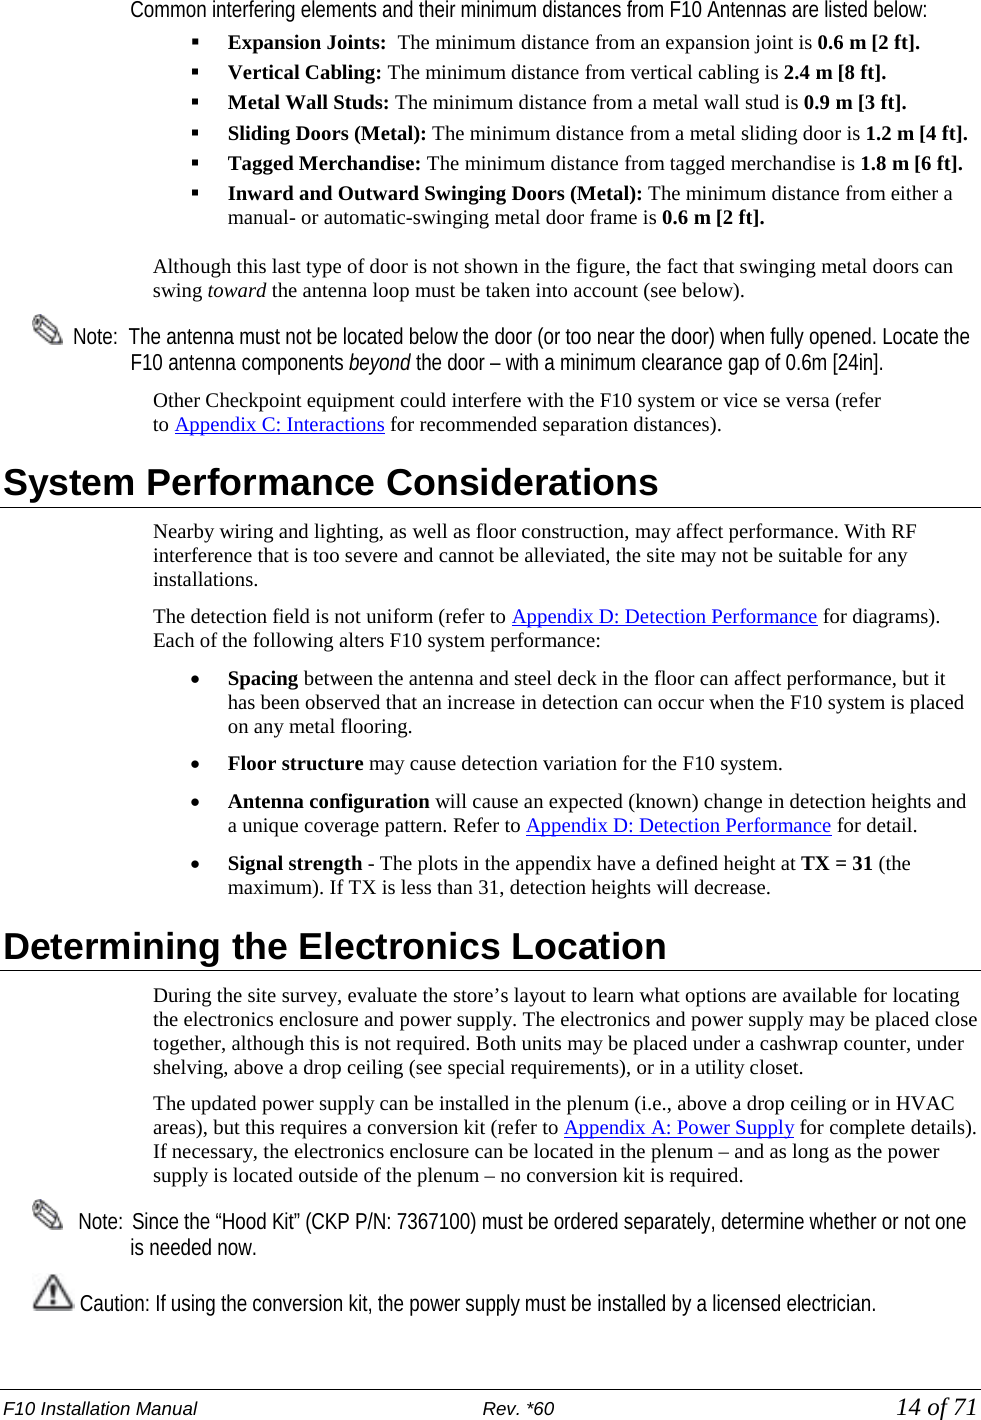 F10 Installation Manual                          Rev. *60            14 of 71     Common interfering elements and their minimum distances from F10 Antennas are listed below:  Expansion Joints:  The minimum distance from an expansion joint is 0.6 m [2 ft].   Vertical Cabling: The minimum distance from vertical cabling is 2.4 m [8 ft].  Metal Wall Studs: The minimum distance from a metal wall stud is 0.9 m [3 ft].  Sliding Doors (Metal): The minimum distance from a metal sliding door is 1.2 m [4 ft].  Tagged Merchandise: The minimum distance from tagged merchandise is 1.8 m [6 ft].  Inward and Outward Swinging Doors (Metal): The minimum distance from either a manual- or automatic-swinging metal door frame is 0.6 m [2 ft]. Although this last type of door is not shown in the figure, the fact that swinging metal doors can swing toward the antenna loop must be taken into account (see below).    Note:  The antenna must not be located below the door (or too near the door) when fully opened. Locate the F10 antenna components beyond the door – with a minimum clearance gap of 0.6m [24in].  Other Checkpoint equipment could interfere with the F10 system or vice se versa (refer to Appendix C: Interactions for recommended separation distances).  System Performance Considerations Nearby wiring and lighting, as well as floor construction, may affect performance. With RF interference that is too severe and cannot be alleviated, the site may not be suitable for any installations.  The detection field is not uniform (refer to Appendix D: Detection Performance for diagrams). Each of the following alters F10 system performance:  • Spacing between the antenna and steel deck in the floor can affect performance, but it has been observed that an increase in detection can occur when the F10 system is placed on any metal flooring. • Floor structure may cause detection variation for the F10 system. • Antenna configuration will cause an expected (known) change in detection heights and a unique coverage pattern. Refer to Appendix D: Detection Performance for detail.  • Signal strength - The plots in the appendix have a defined height at TX = 31 (the maximum). If TX is less than 31, detection heights will decrease. Determining the Electronics Location   During the site survey, evaluate the store’s layout to learn what options are available for locating the electronics enclosure and power supply. The electronics and power supply may be placed close together, although this is not required. Both units may be placed under a cashwrap counter, under shelving, above a drop ceiling (see special requirements), or in a utility closet. The updated power supply can be installed in the plenum (i.e., above a drop ceiling or in HVAC areas), but this requires a conversion kit (refer to Appendix A: Power Supply for complete details). If necessary, the electronics enclosure can be located in the plenum – and as long as the power supply is located outside of the plenum – no conversion kit is required.     Note:  Since the “Hood Kit” (CKP P/N: 7367100) must be ordered separately, determine whether or not one is needed now.  Caution: If using the conversion kit, the power supply must be installed by a licensed electrician. 